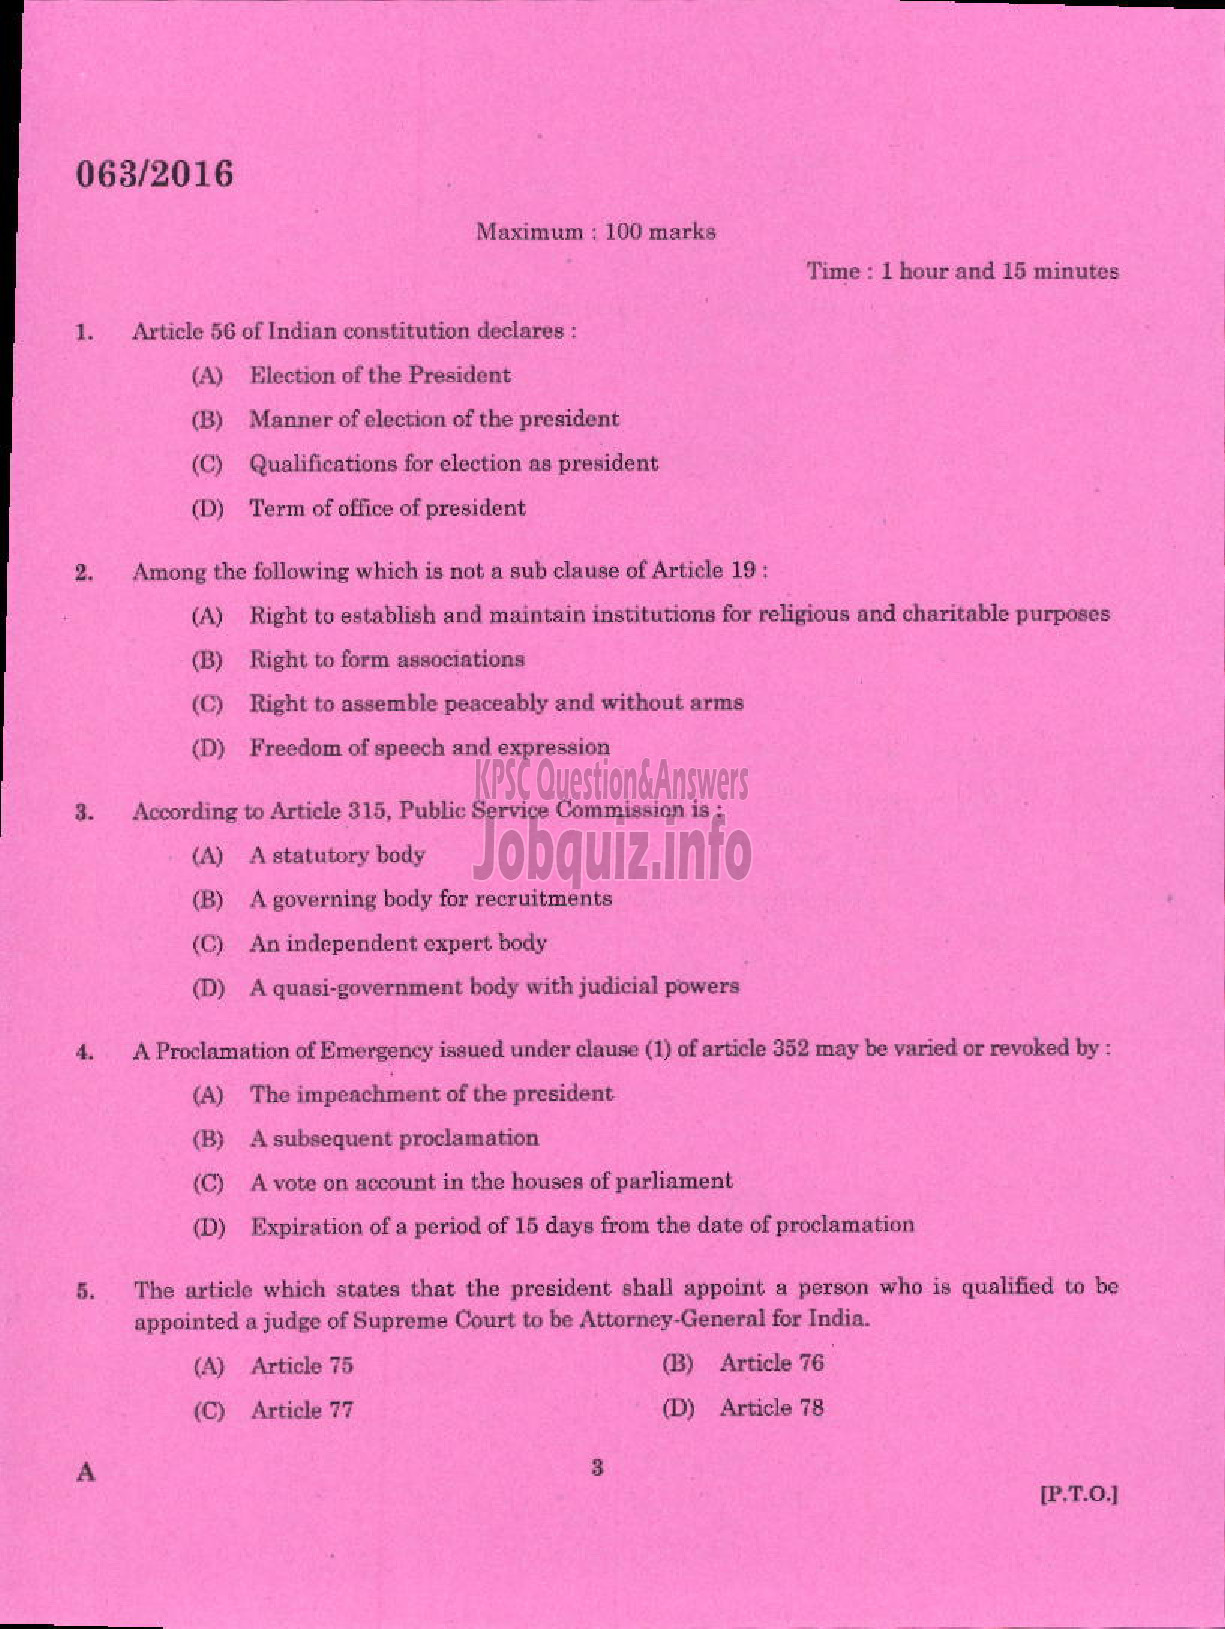 Kerala PSC Question Paper - ASSISTANT PROFESSOR IN ELECTRICAL AND ELECTRONICS ENGINEERING TECHNICAL EDUCATION ENGINEERING COLLEGES-1